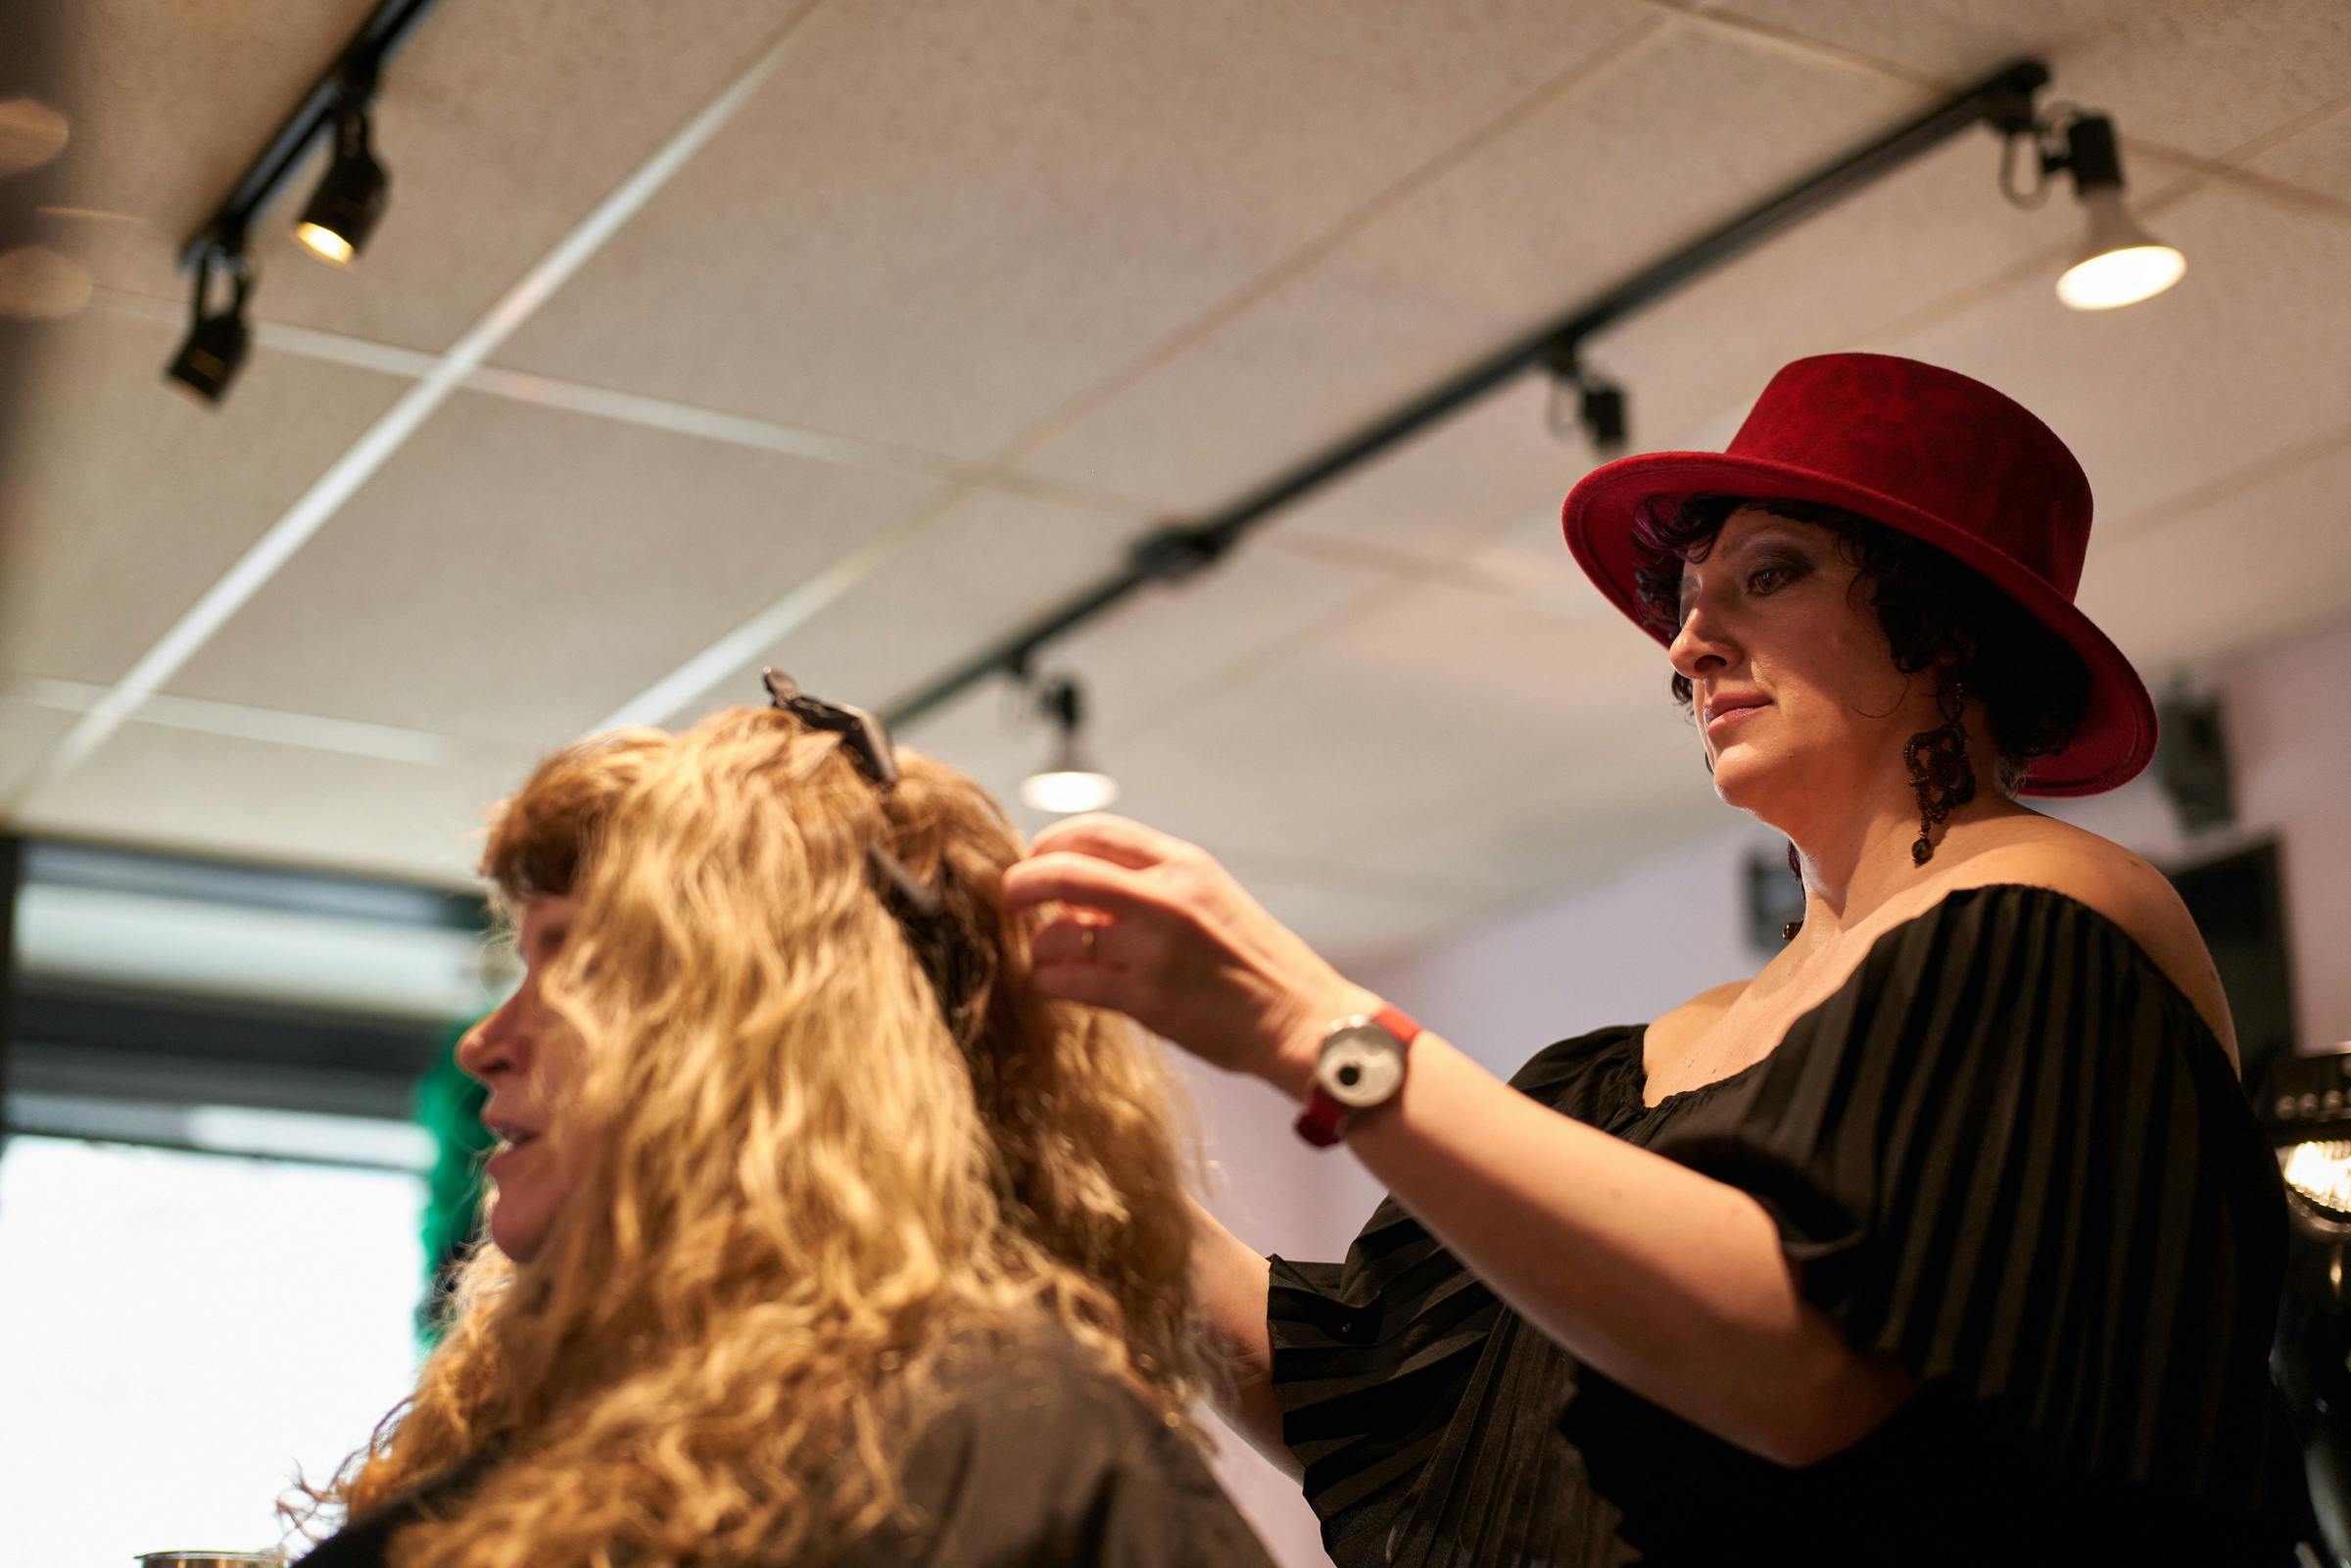 Candid photography for Verve Salon in Nazareth, PA